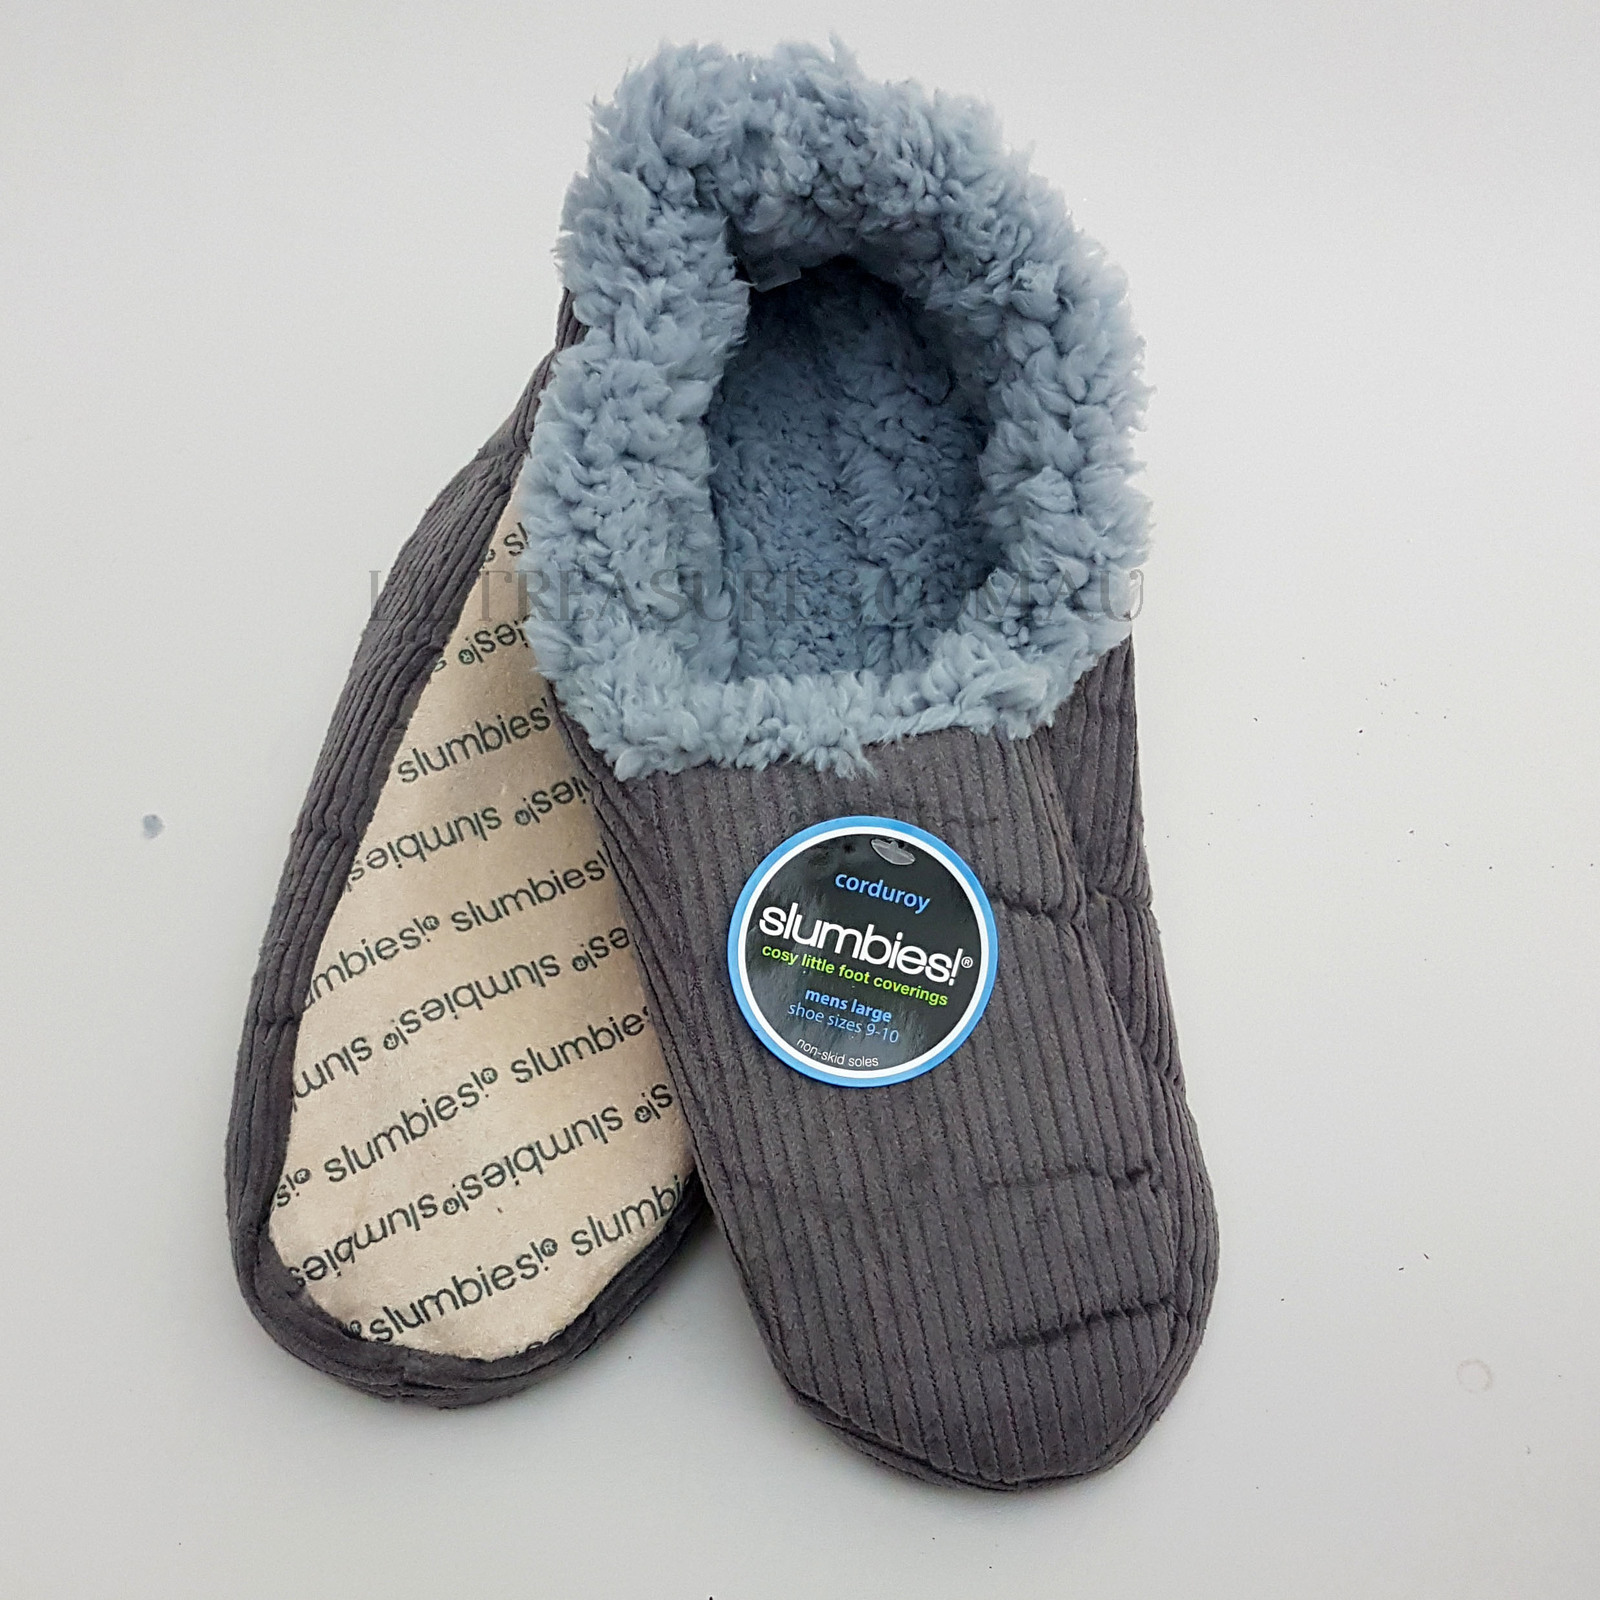 mens washable slippers